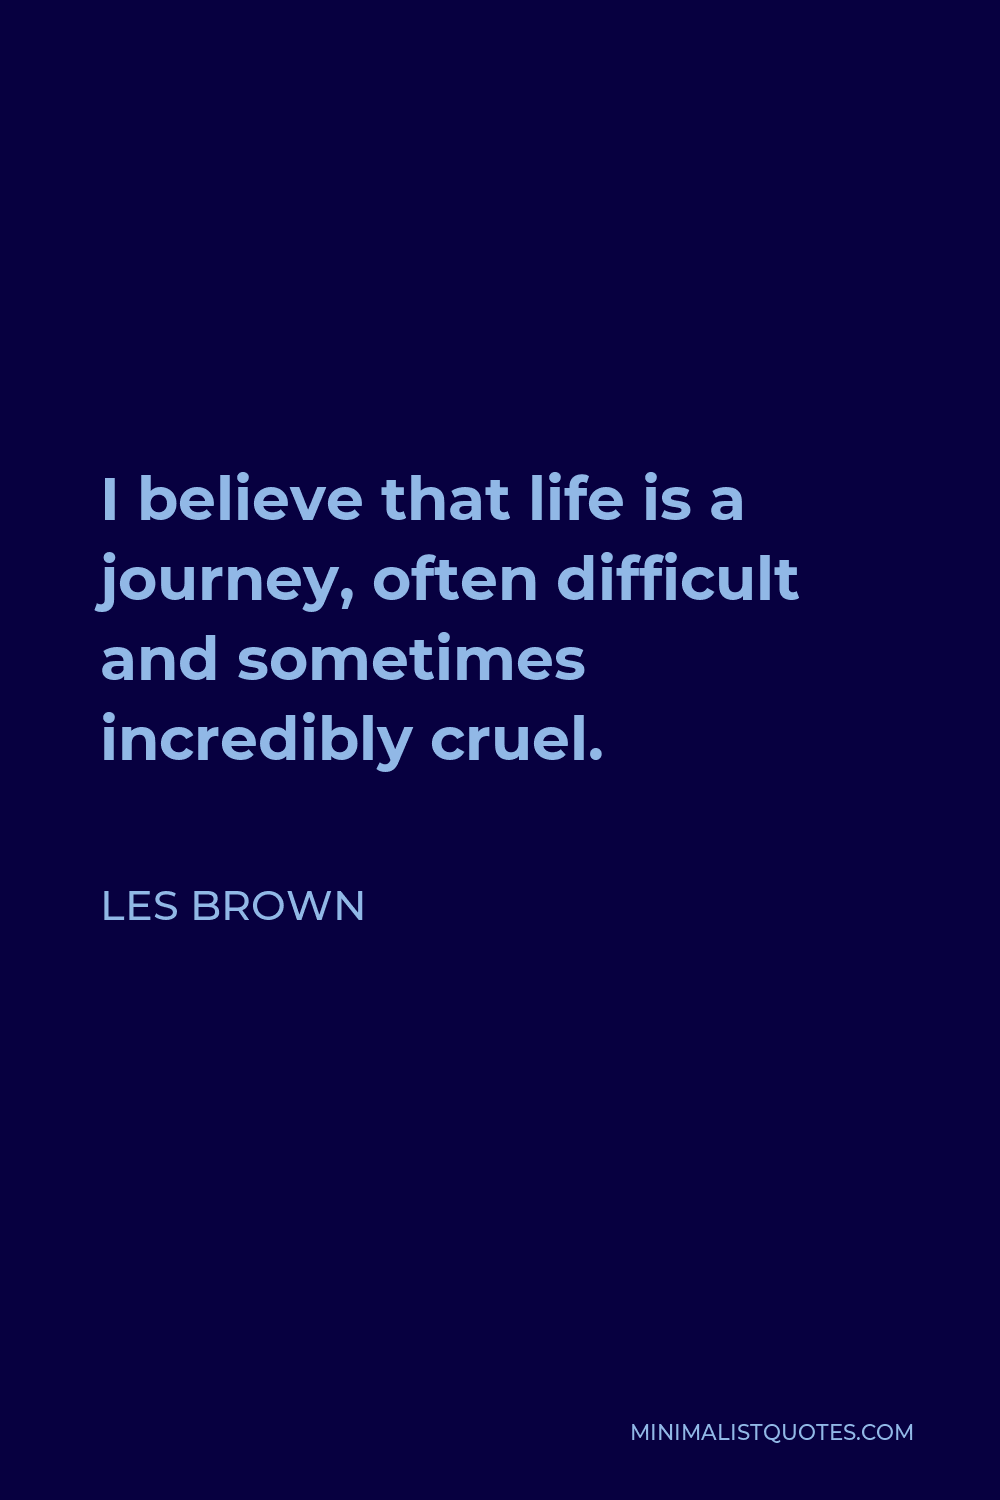 Les Brown Quote - I believe that life is a journey, often difficult and sometimes incredibly cruel.